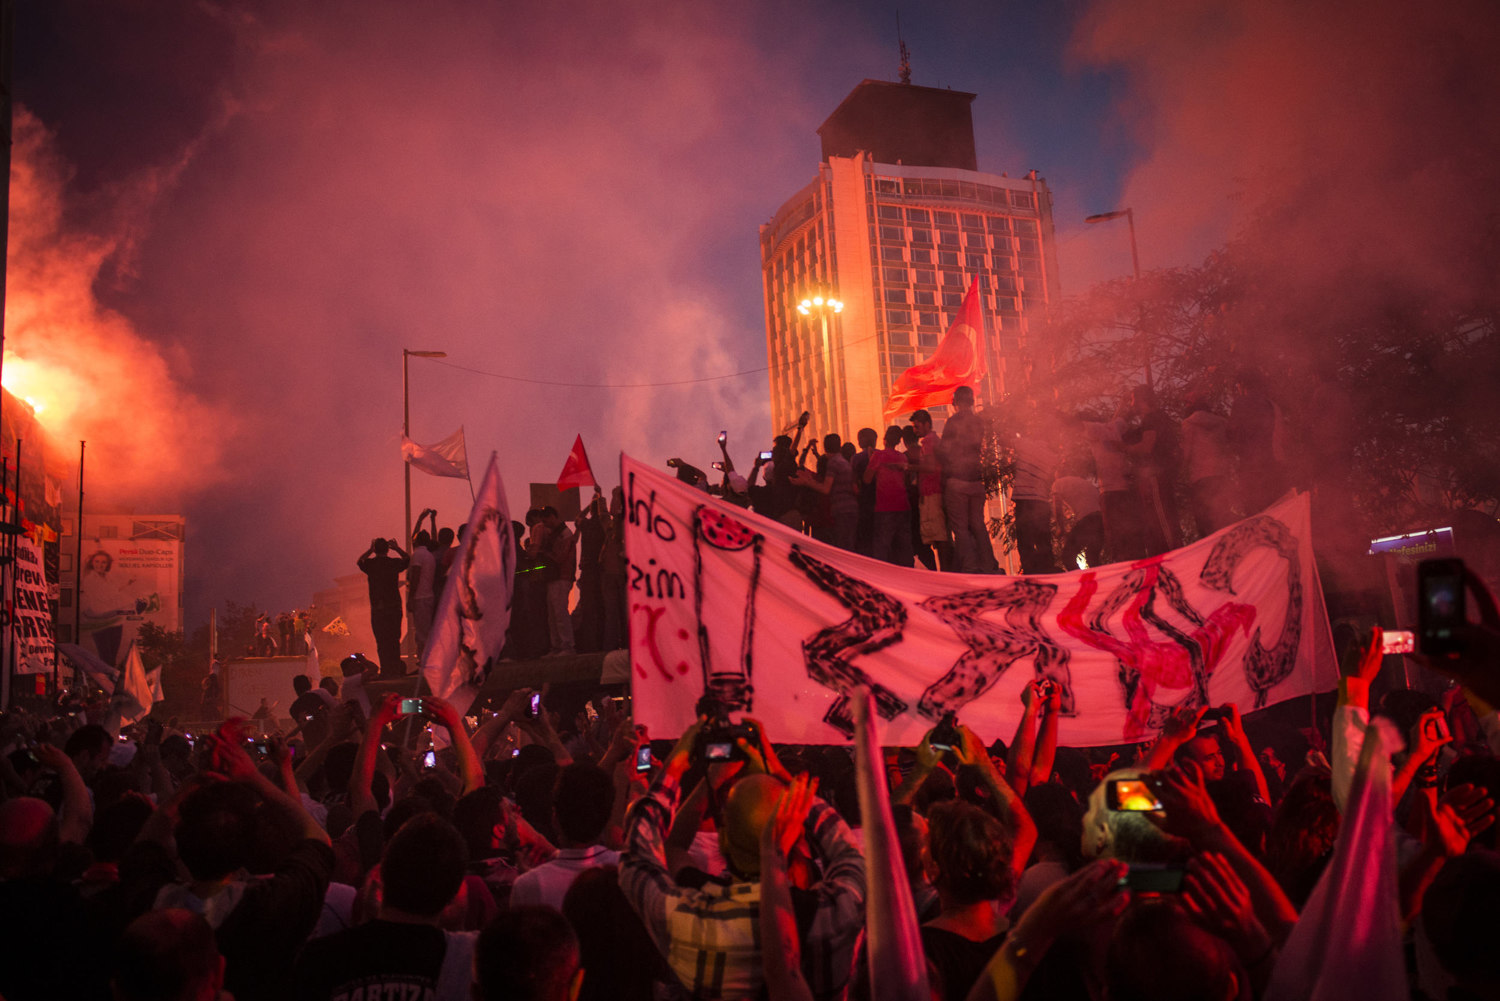  Fans merge in Taksim square, lighting flares and fireworks on June 8, 2013. Hundreds of thousands of football fans from the three major Istanbul teams march on Taksim's Gezi Park to protest the AKP party and its head Recep Tayyip Erdogan. 10 days of